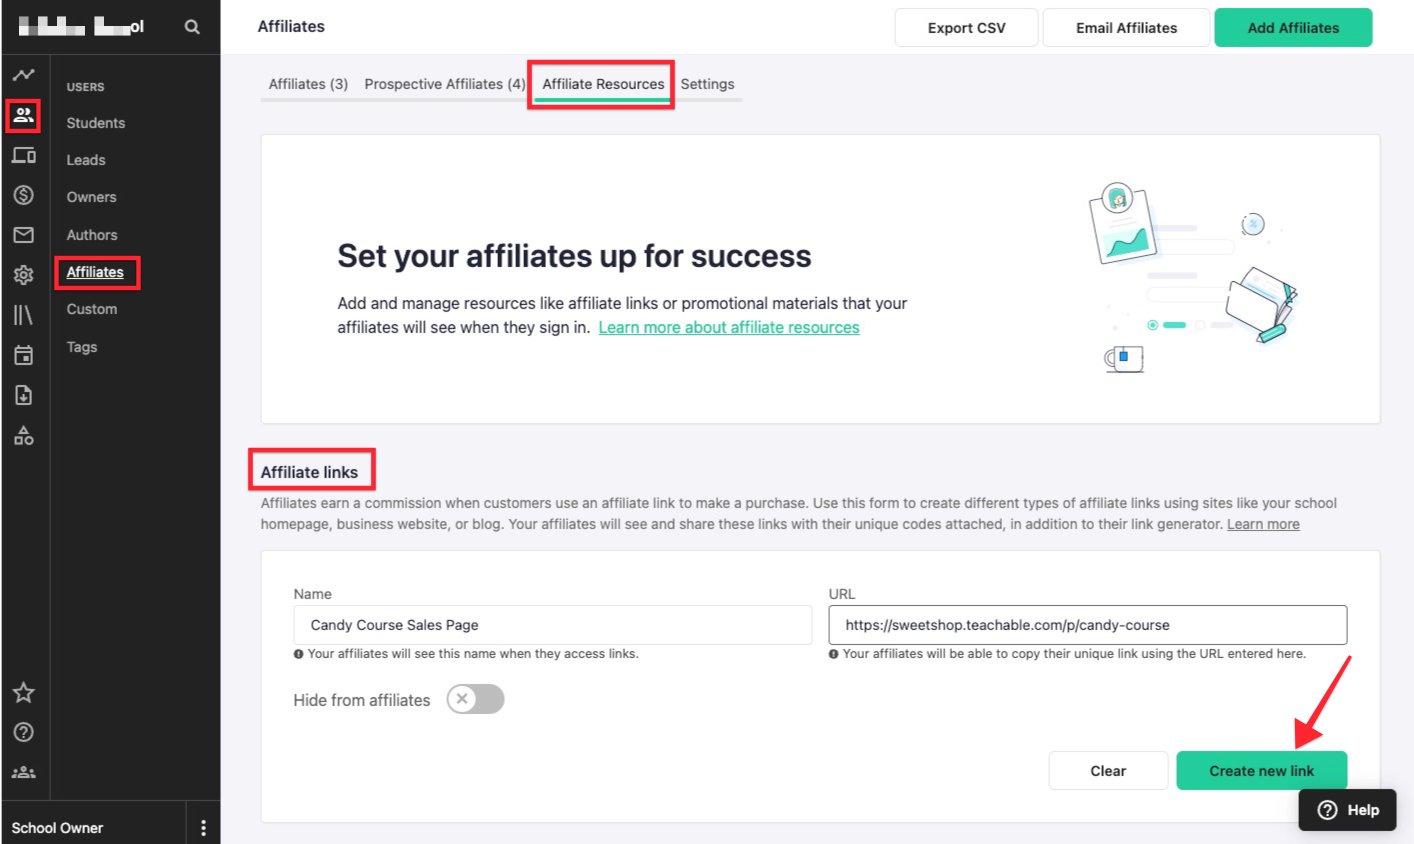 An admin view of a sample Teachable school, showing the Affiliate Resources tab of the Users > Affiliate page. There is an arrow pointing to the Create New Link button.